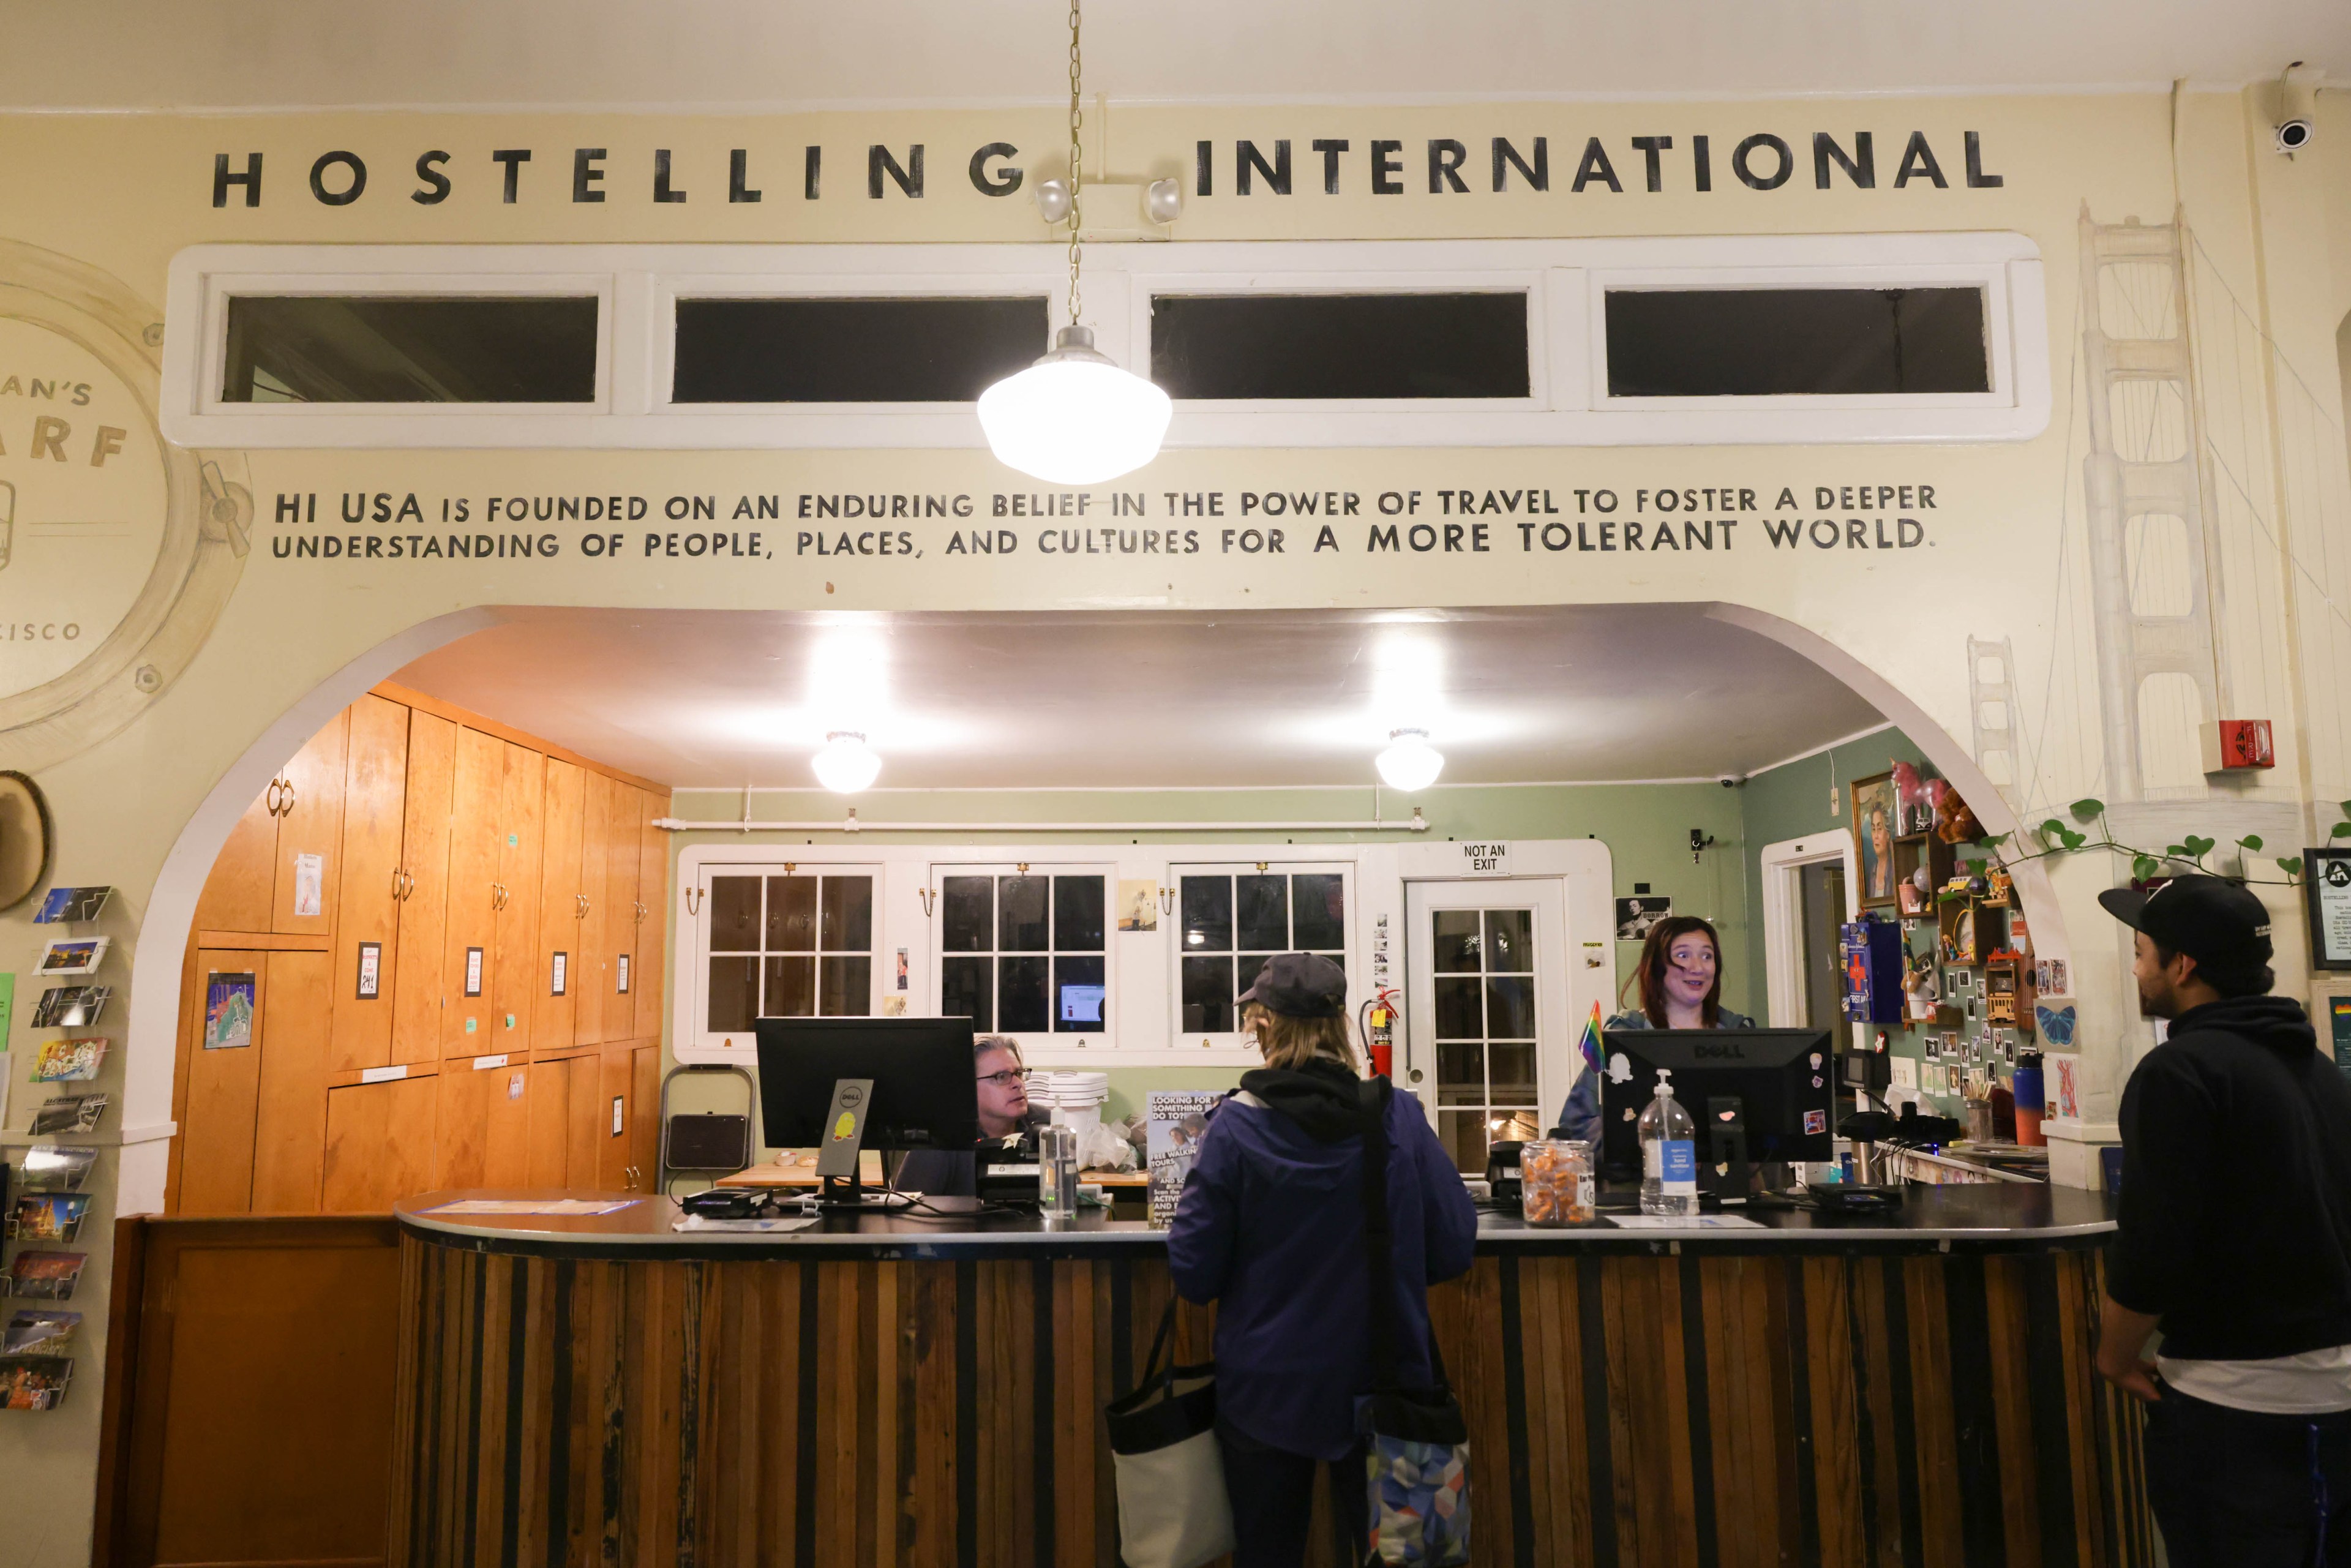 A hostel lobby with guests at the reception, wooden decor, and a mission statement for cultural understanding.